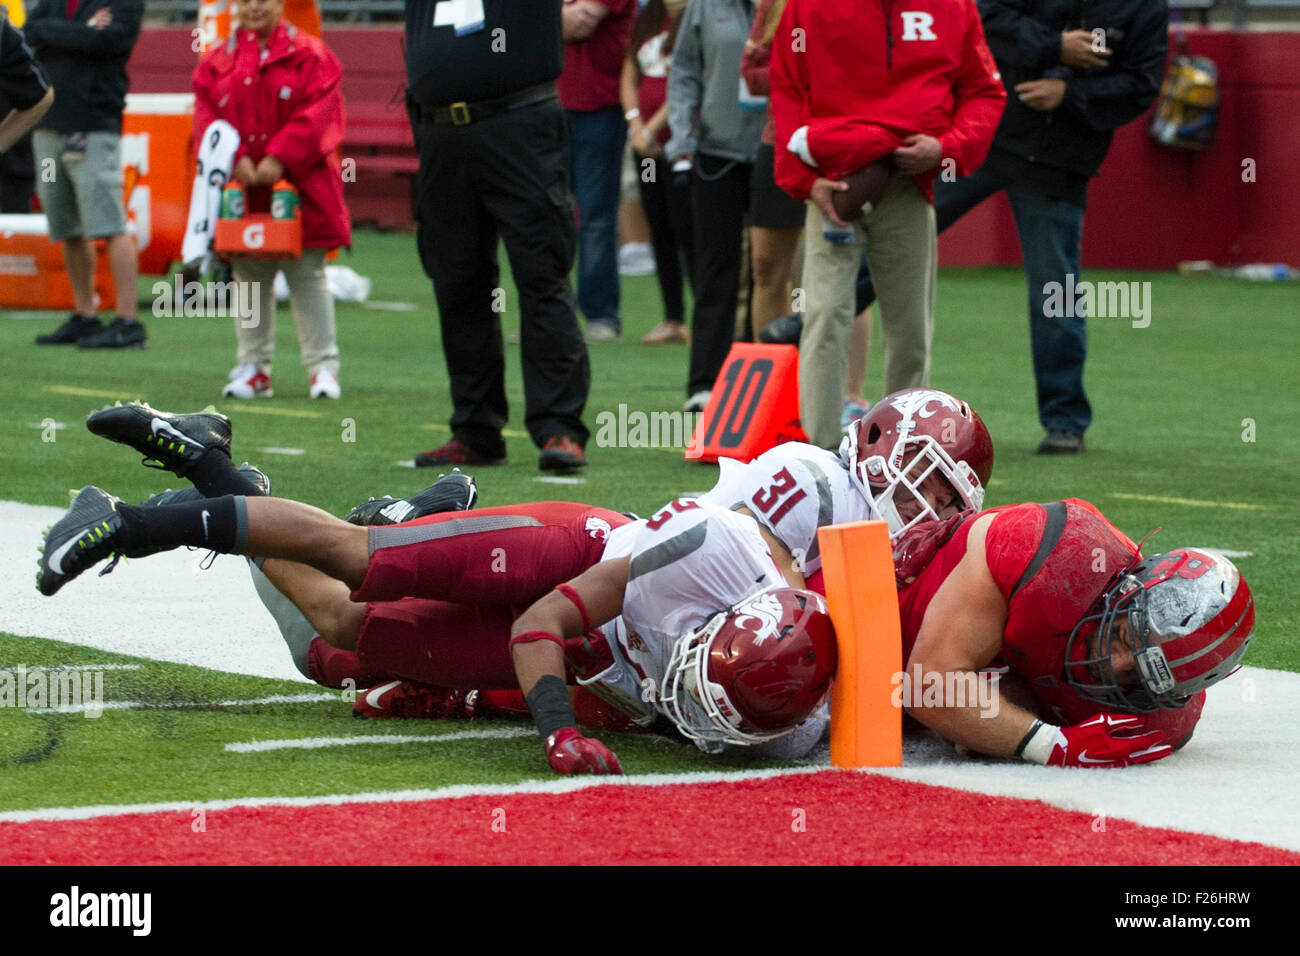 September 12, 2015: Rutgers Scarlet Knights fullback Sam Bergen (44) misses the pylon as he is tackled by Washington State Cougars cornerback Darrien Molton (22) and Washington State Cougars safety Isaac Dotson (31) during the game between Washington State Cougars and Rutgers Scarlet Knights at Highpoint Solutions Stadium in Piscataway, NJ. The Washington State Cougars defeat The Rutgers Scarlet Knights 37-34. Mandatory Credit: Kostas Lymperopoulos/CSM, Stock Photo